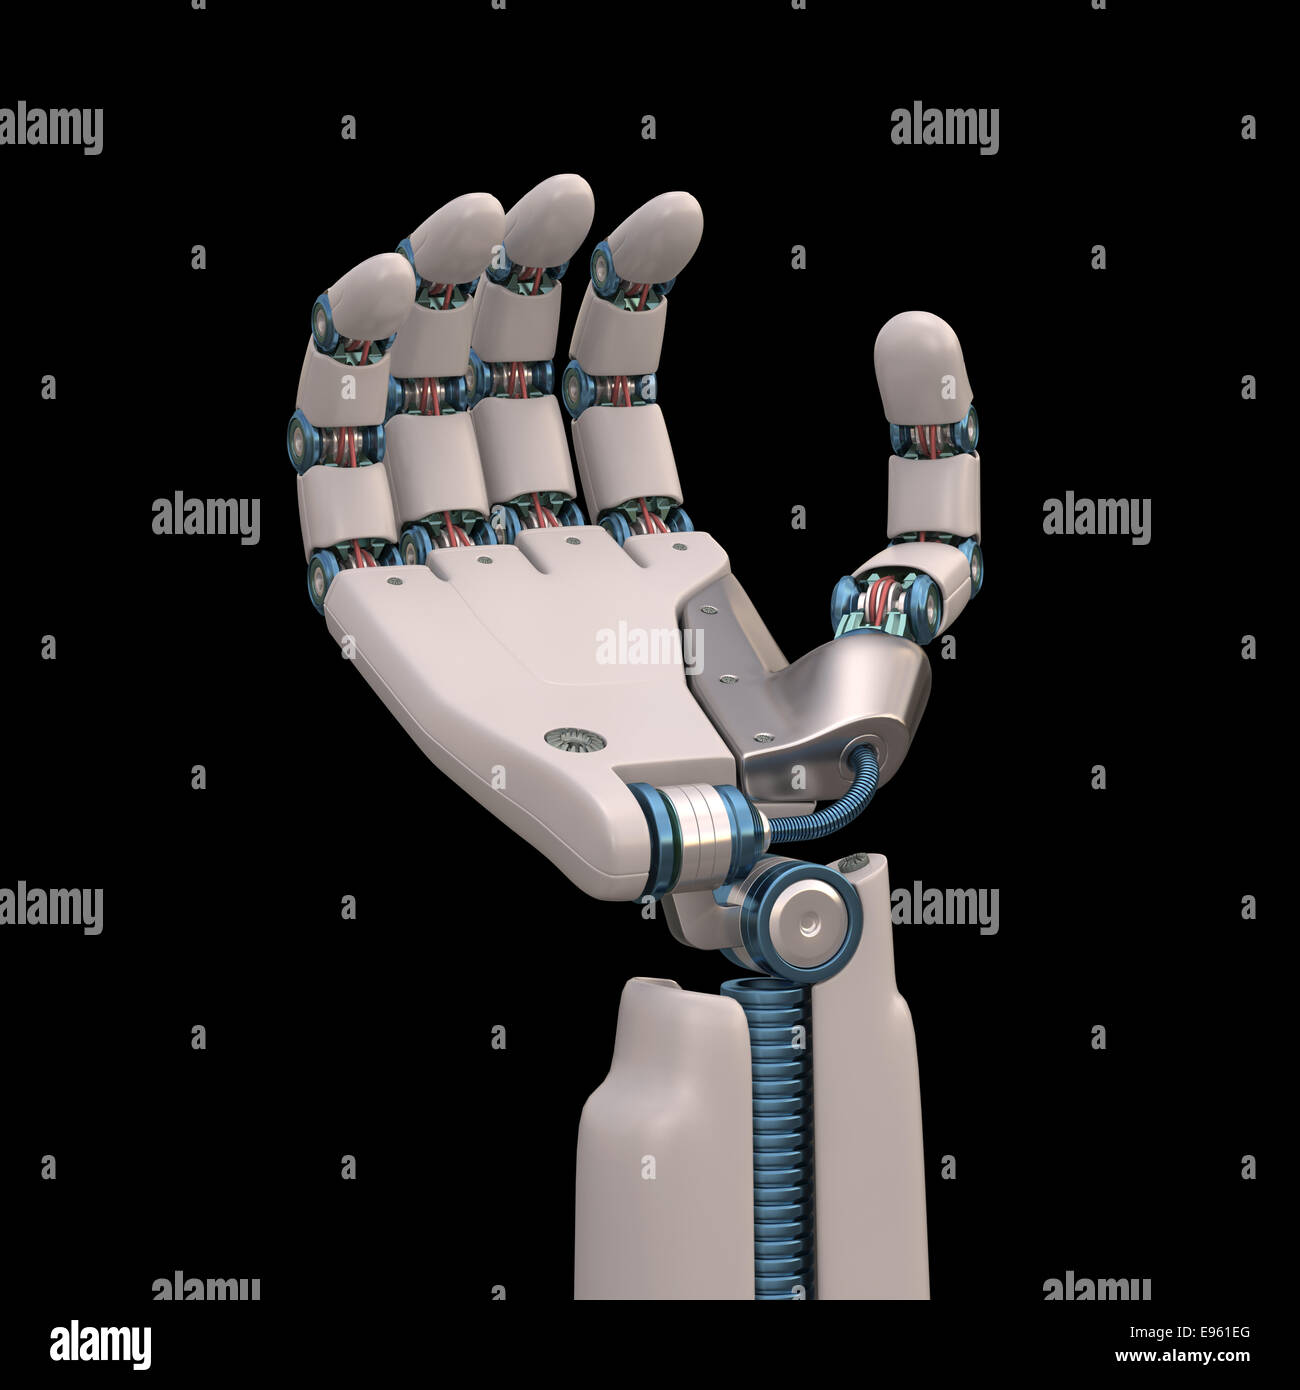 Robotic hand shaped and measures that mimic the human skeleton. Clipping path included. Stock Photo